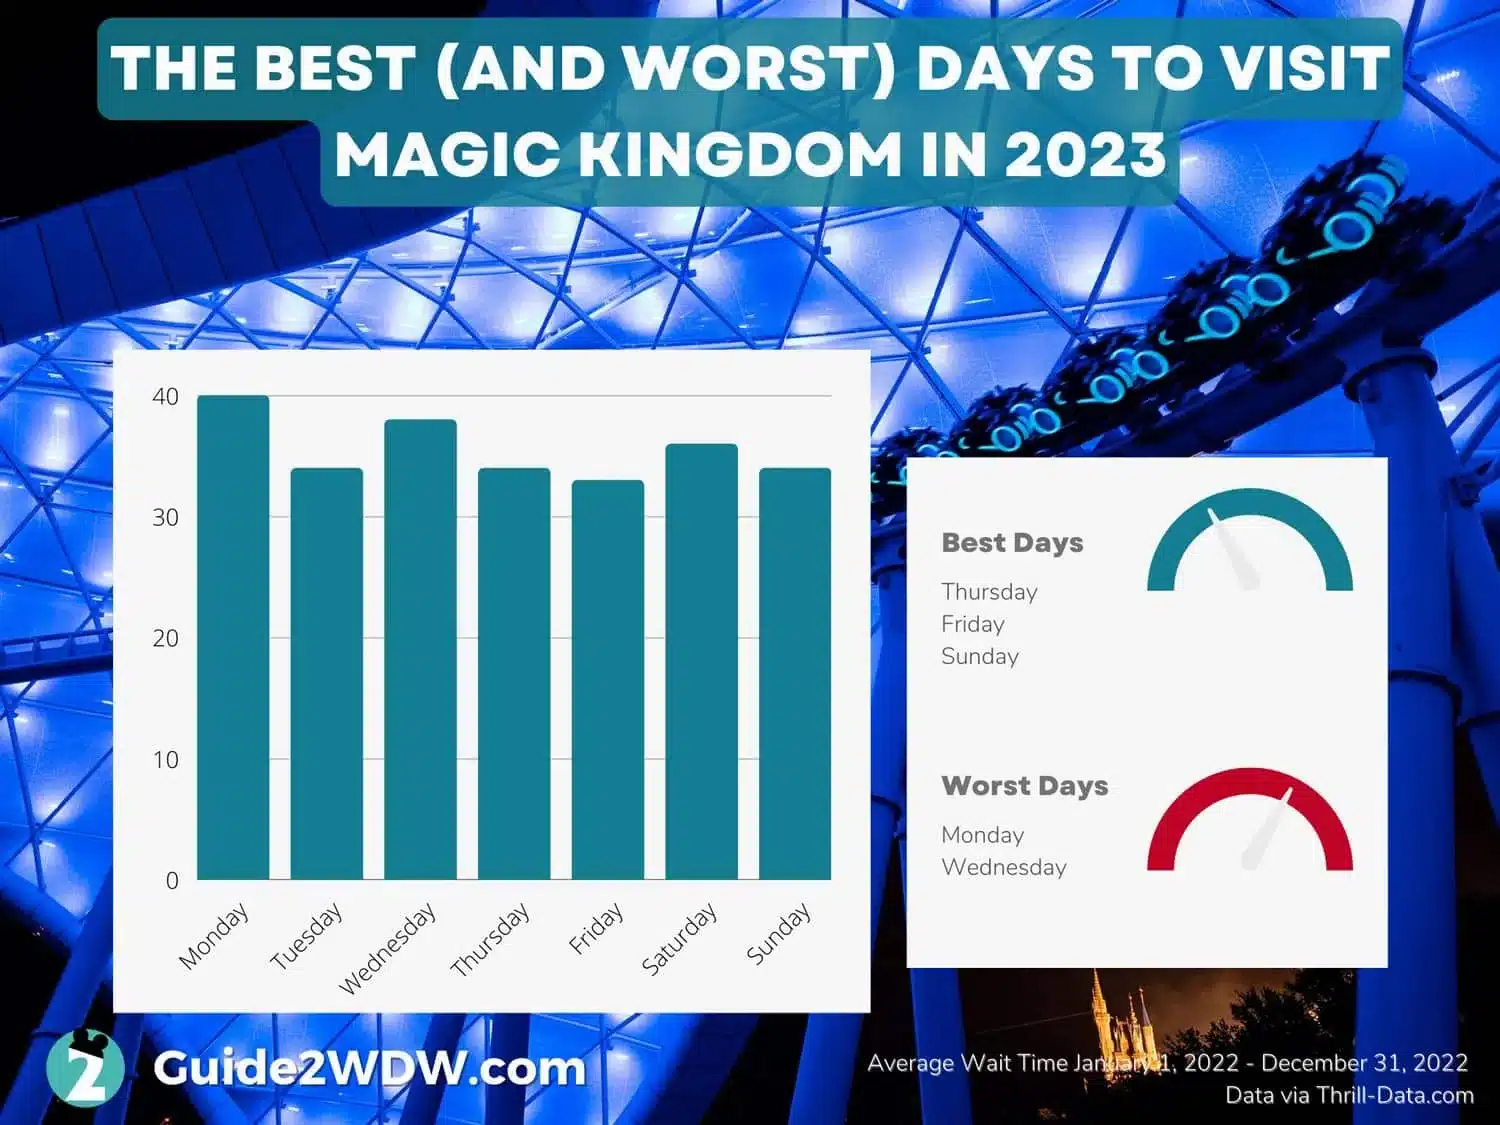 Best and Worst Days to Visit Magic Kingdom in 2023 - Infographic - Guide2WDW